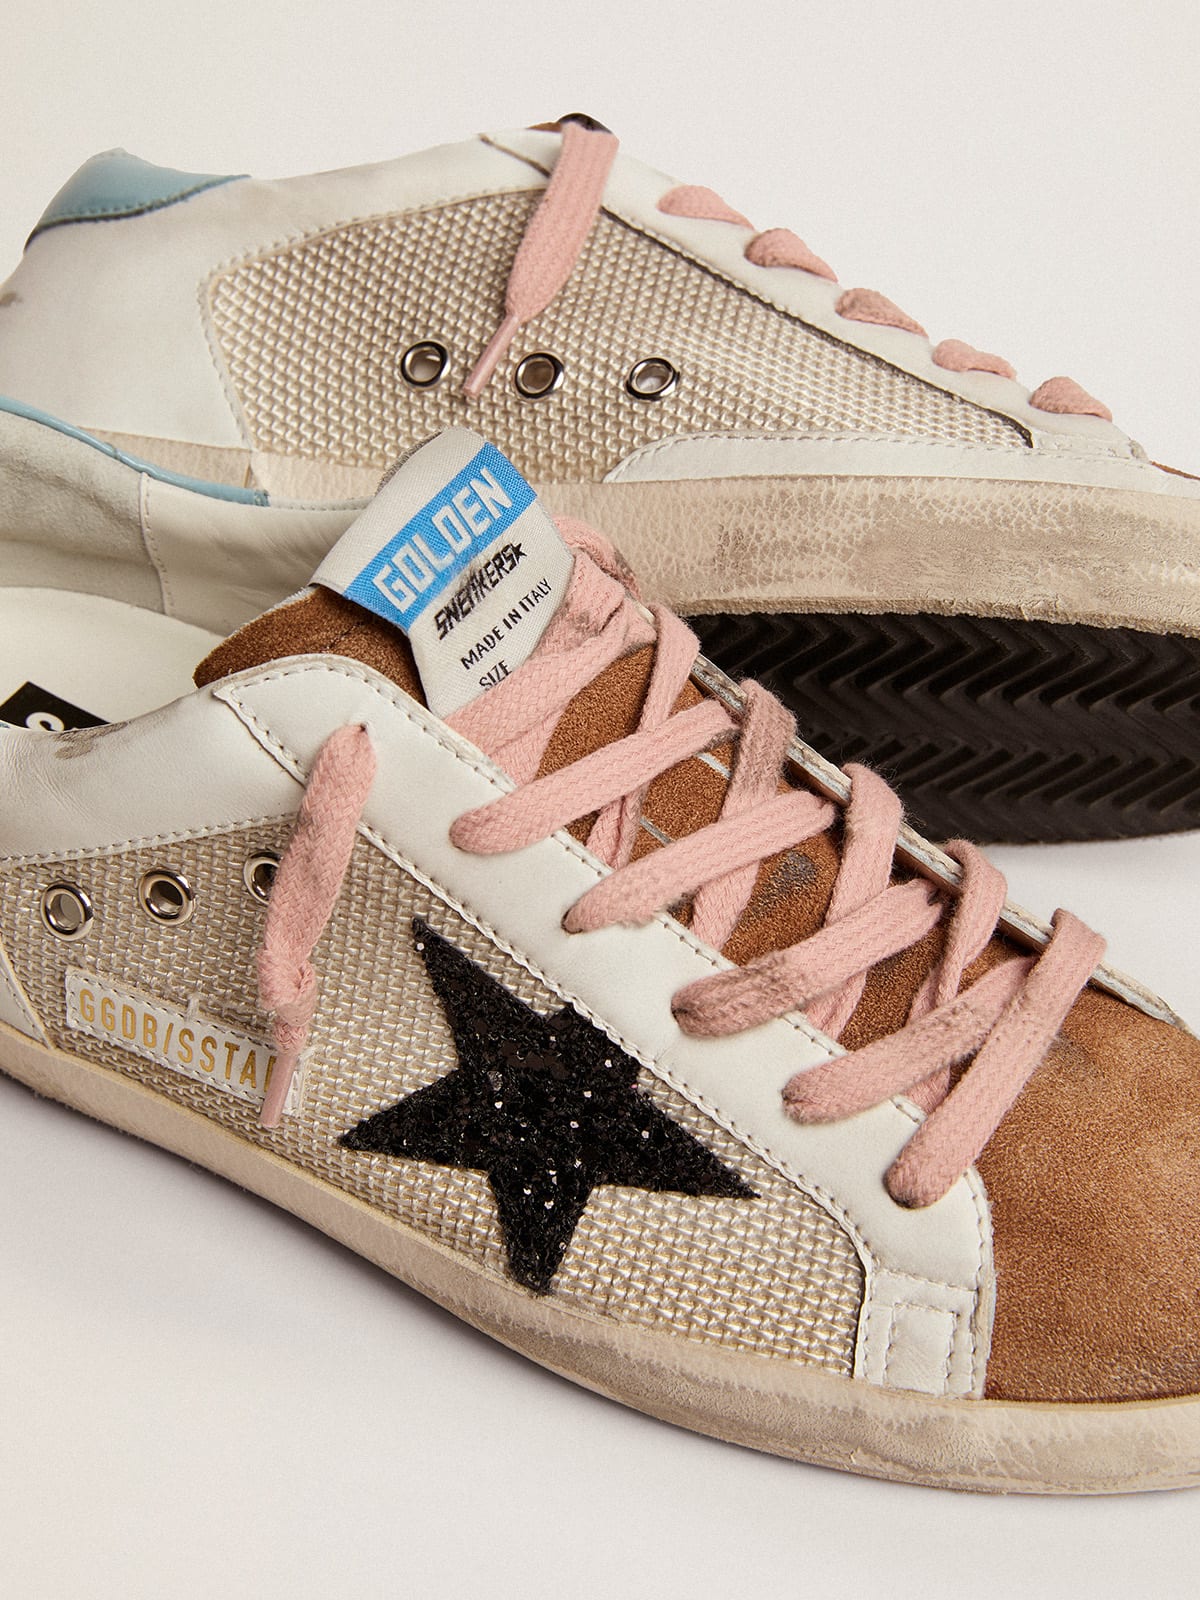 Golden Goose - Super-Star sneakers in light gray mesh and white leather with black glitter star in 